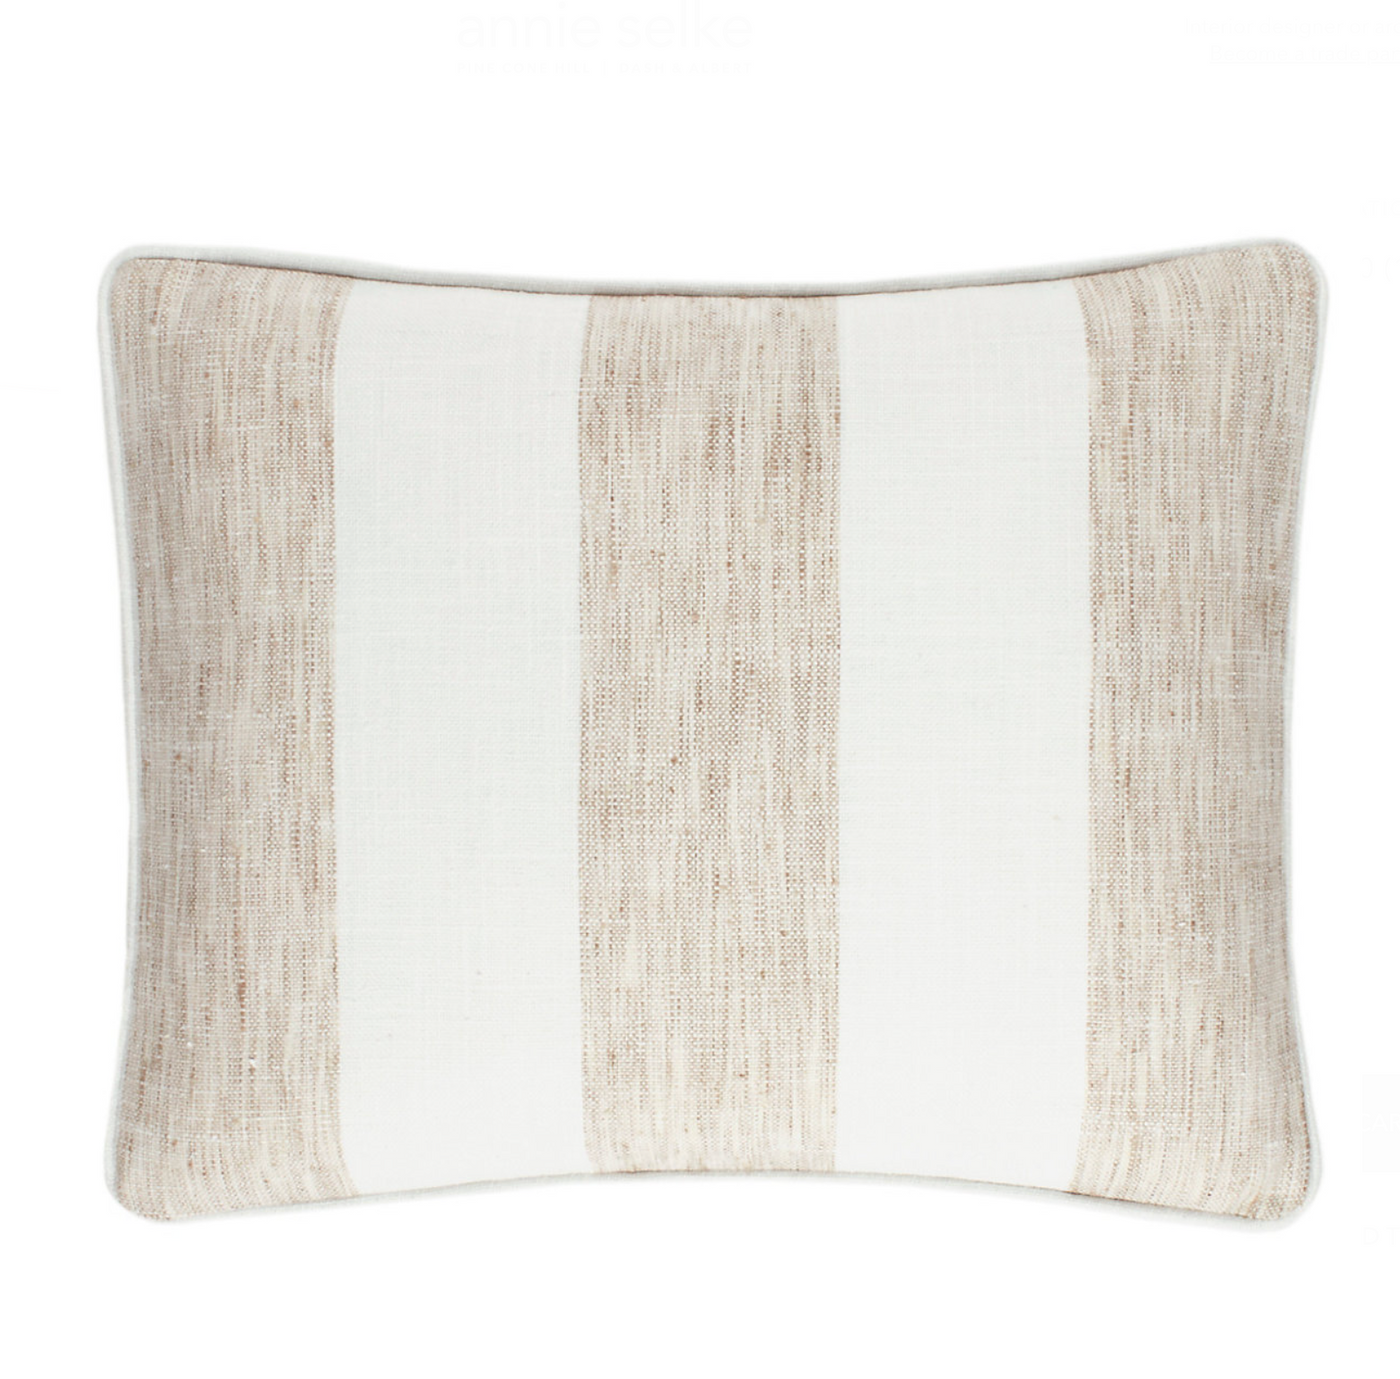 PILLOW DECORATIVE INDOOR/OUTDOOR STRIPE (Available in 3 Colors and 2 Sizes)